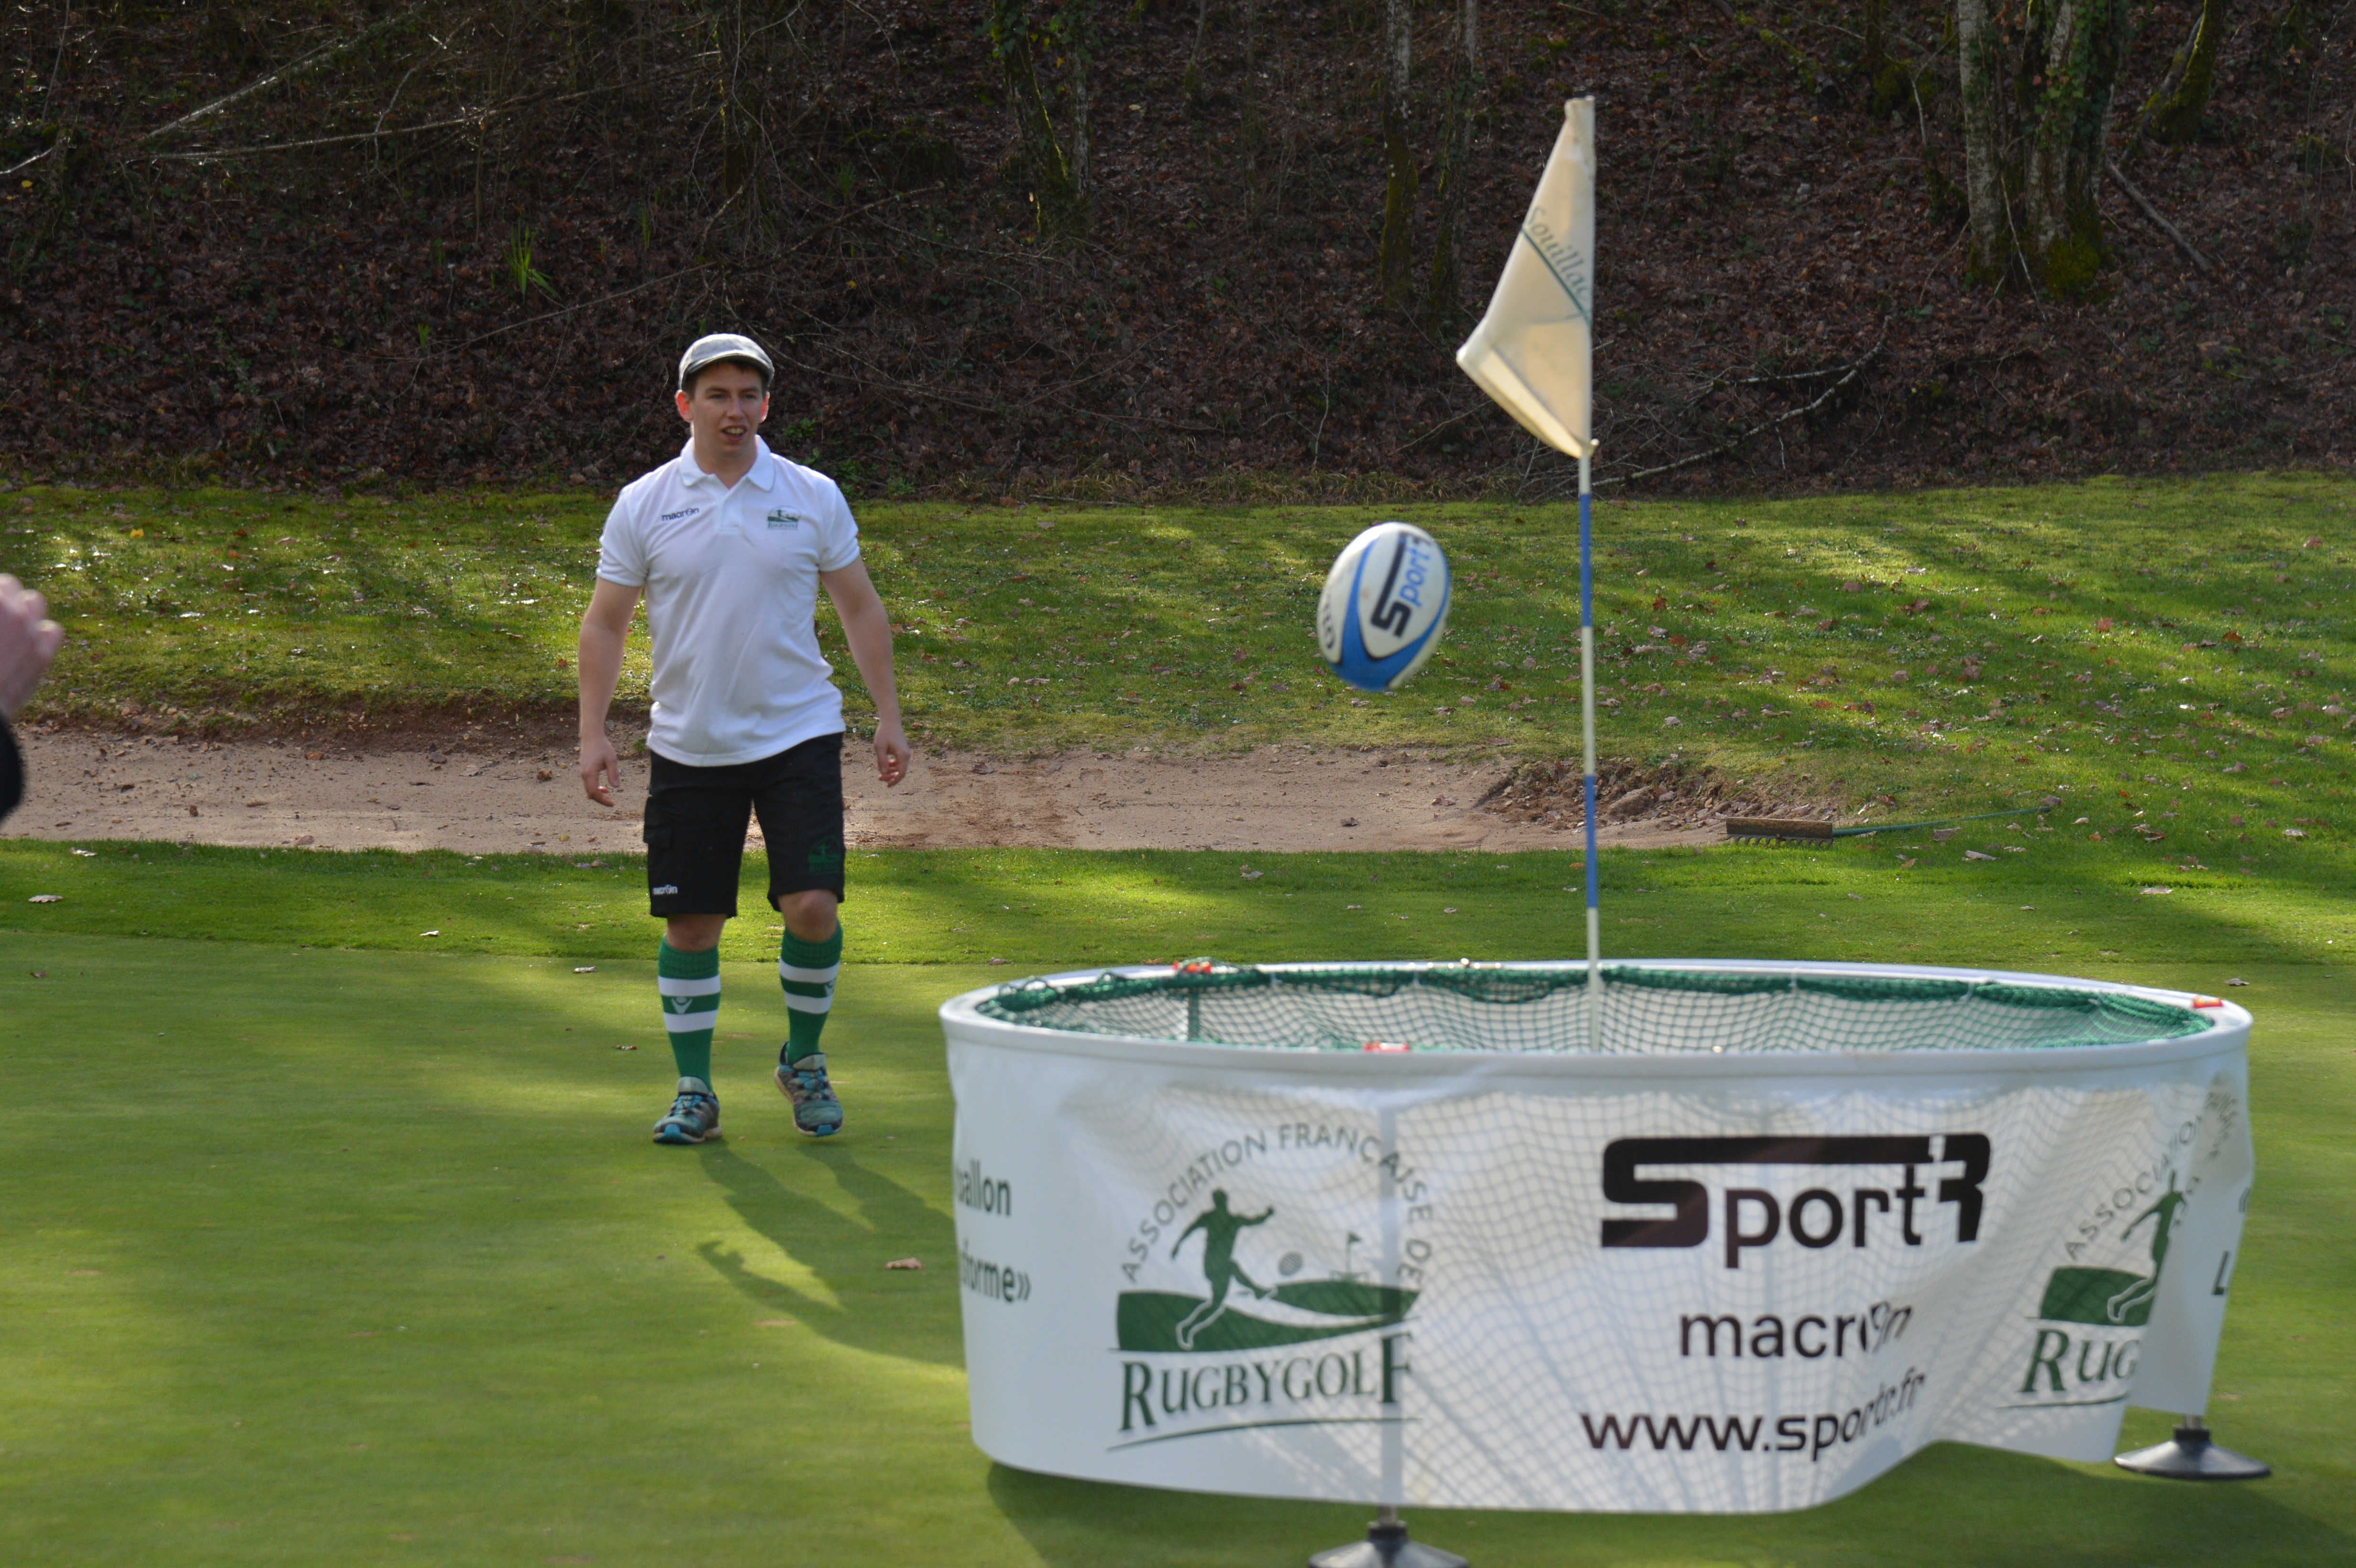 Le Rugby Golf